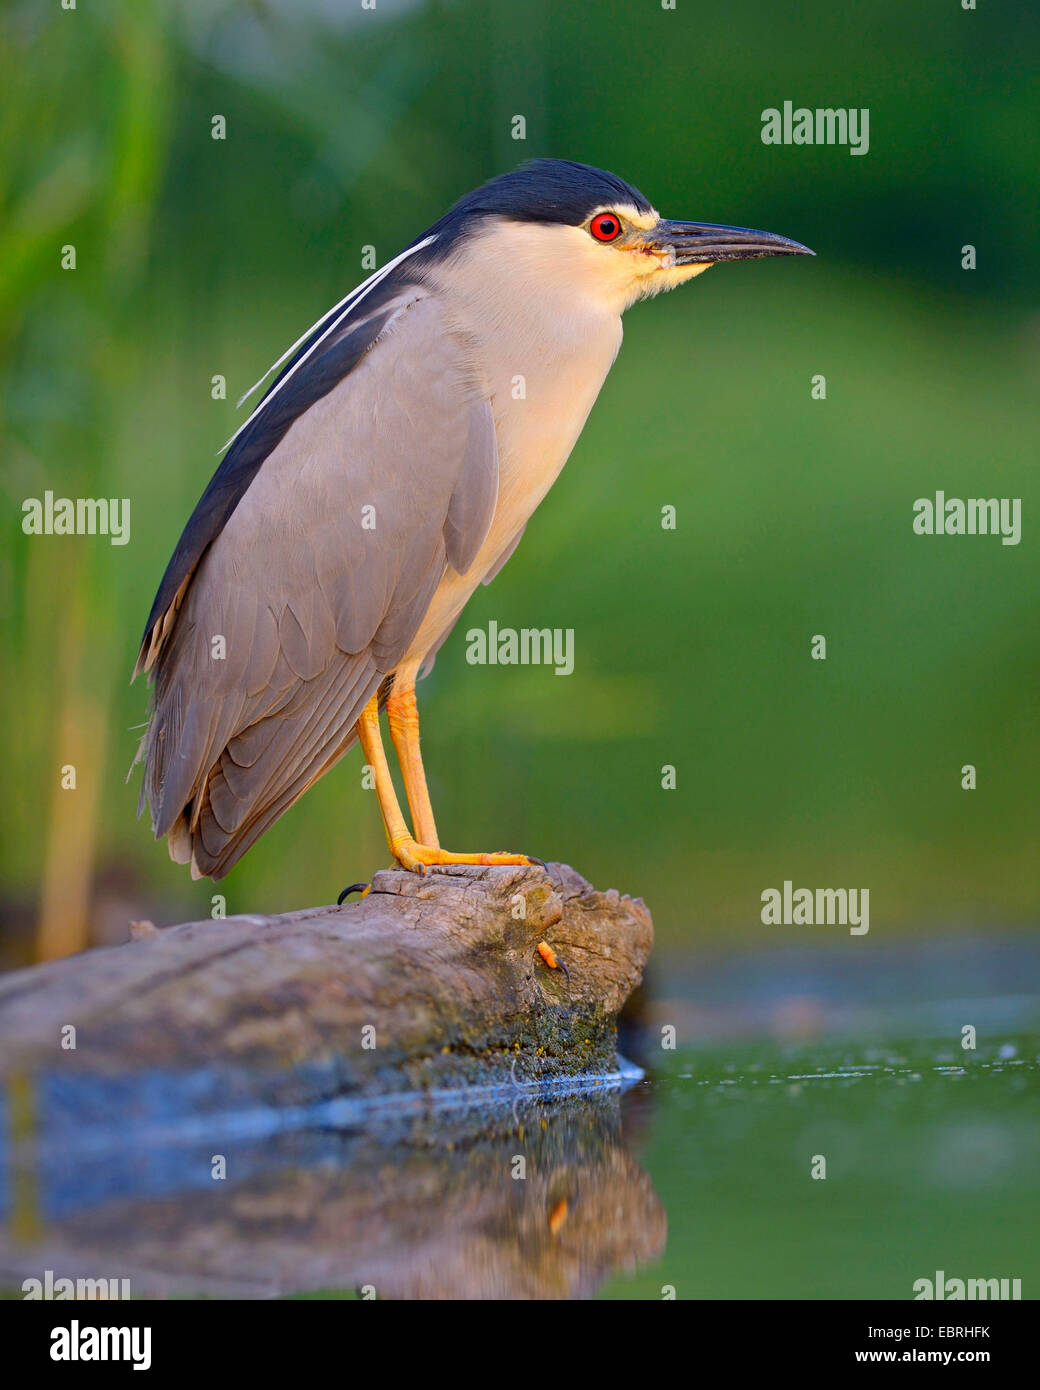 black-crowned night heron (Nycticorax nycticorax), on a fallen tree trunk in morning light, Hungary Stock Photo